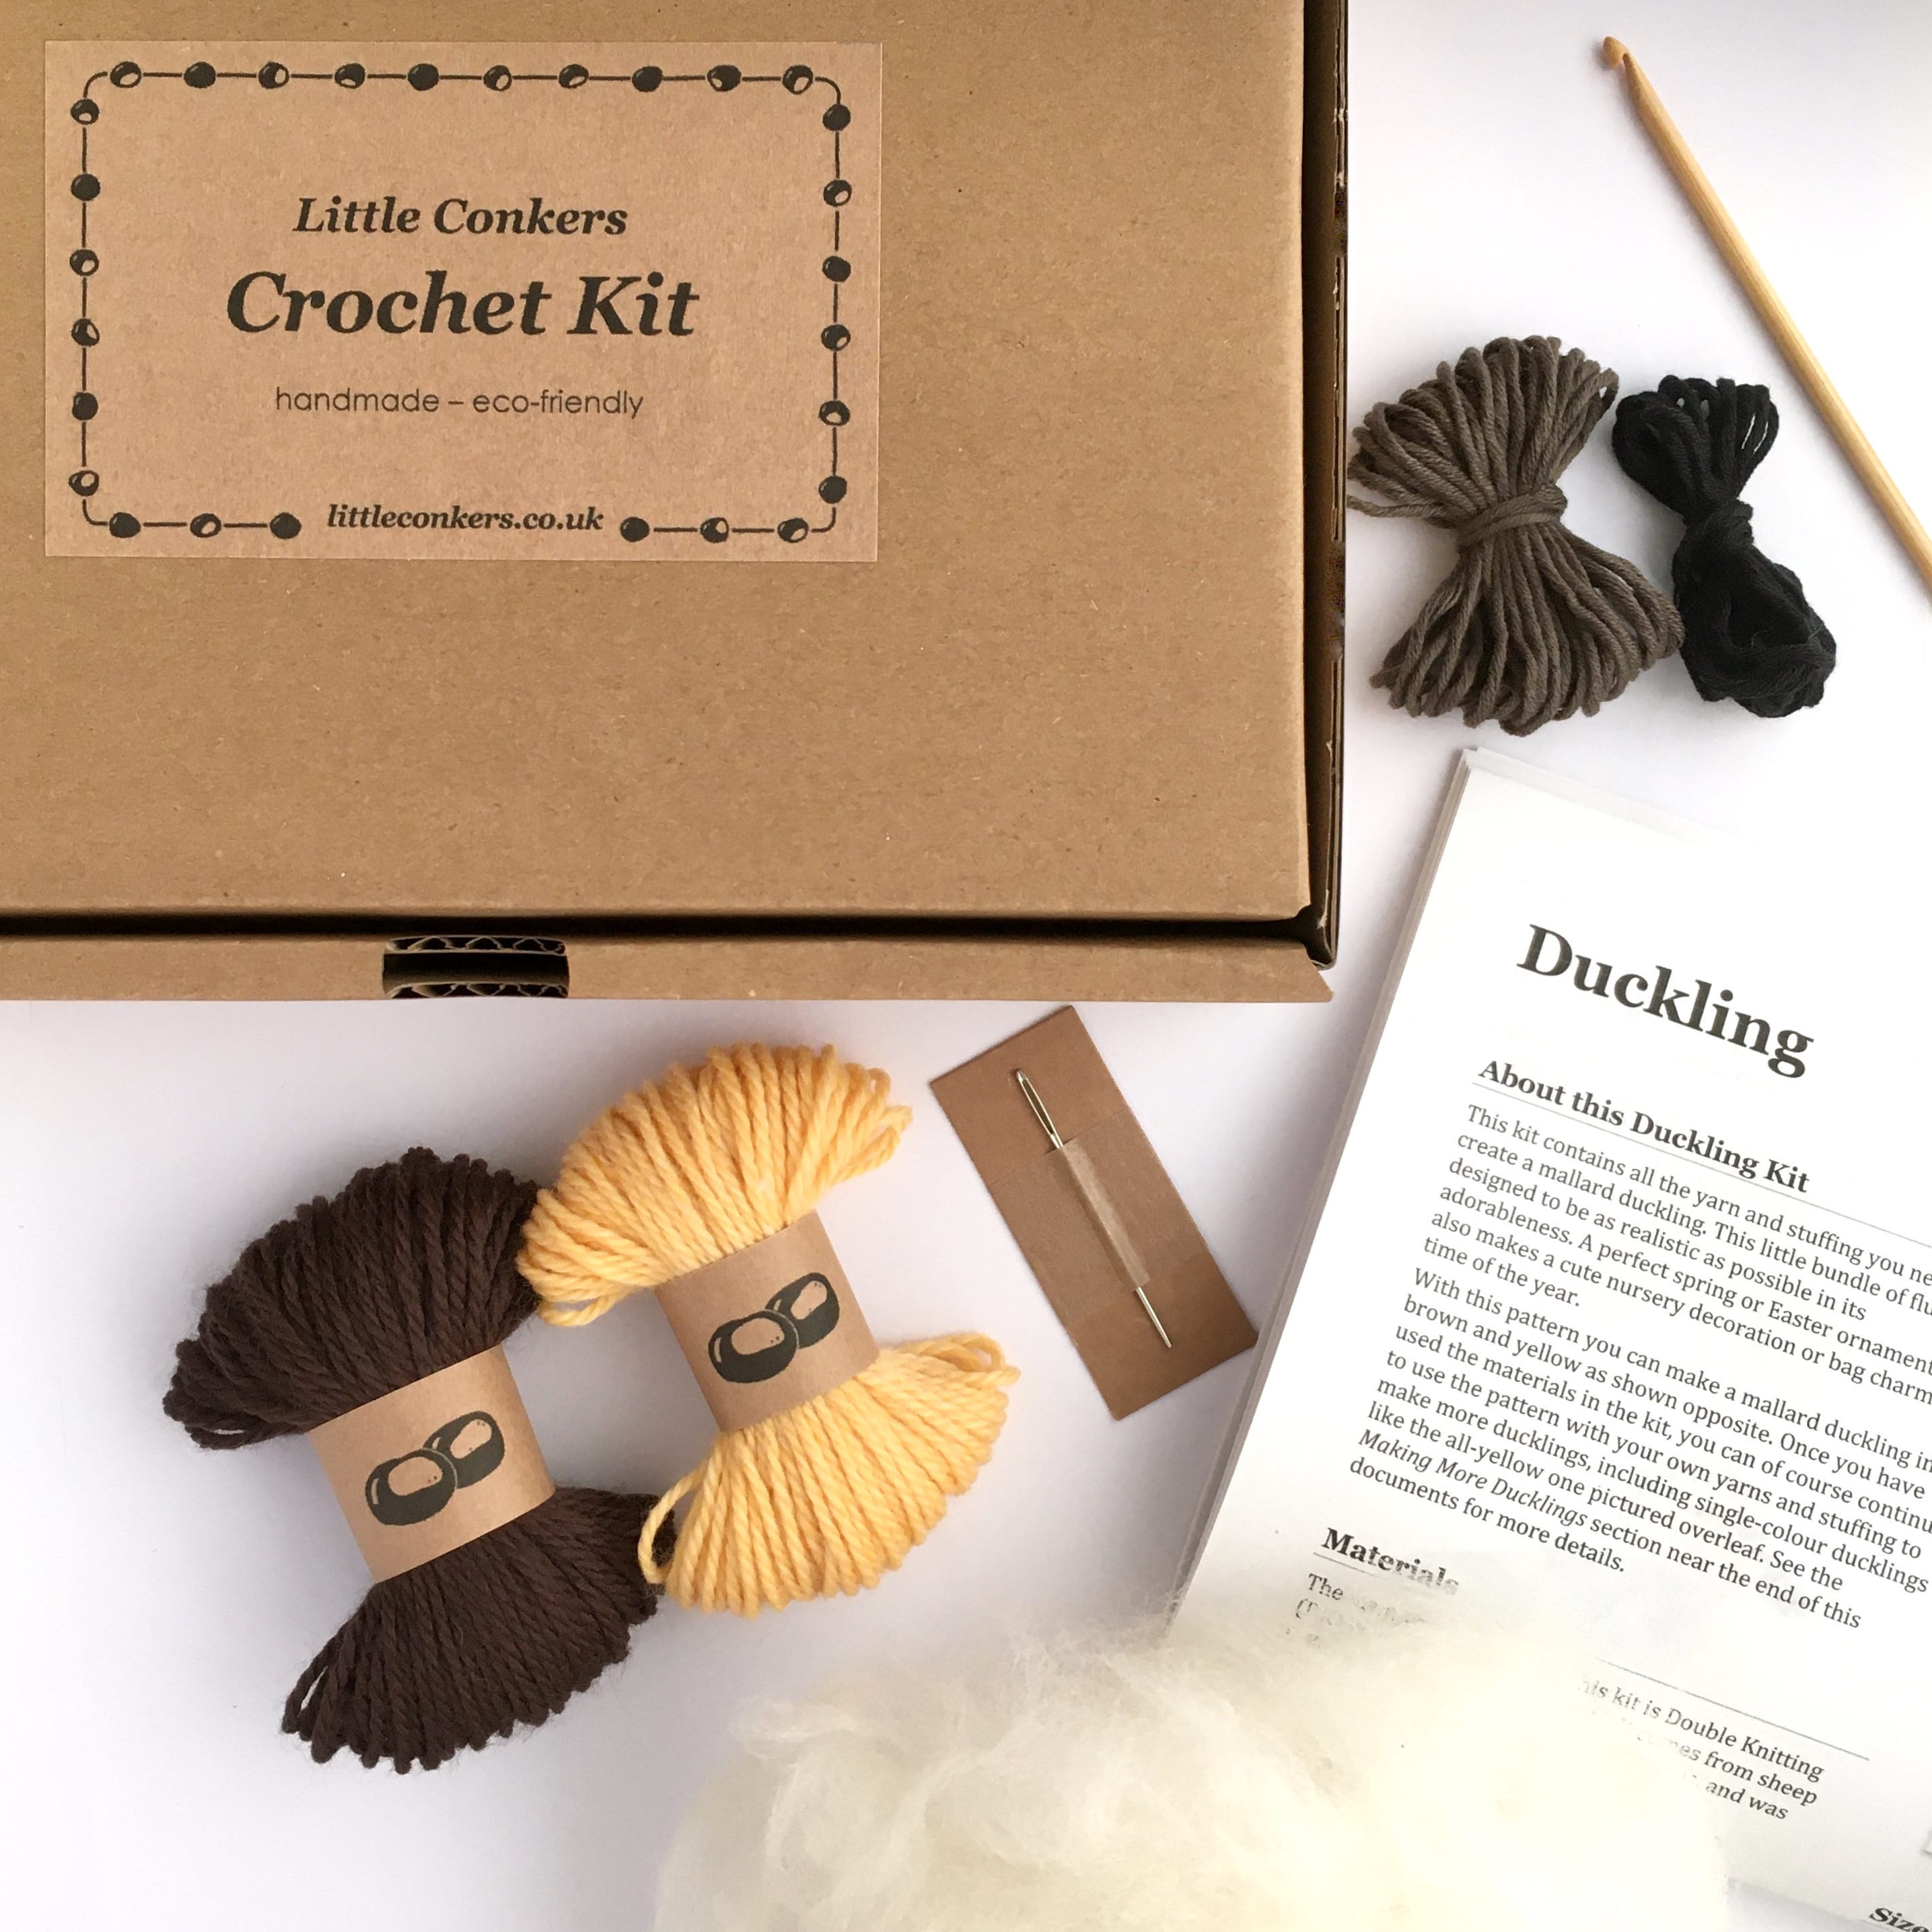 Crochet Kits - everything you need for successful crochet - Little Conkers